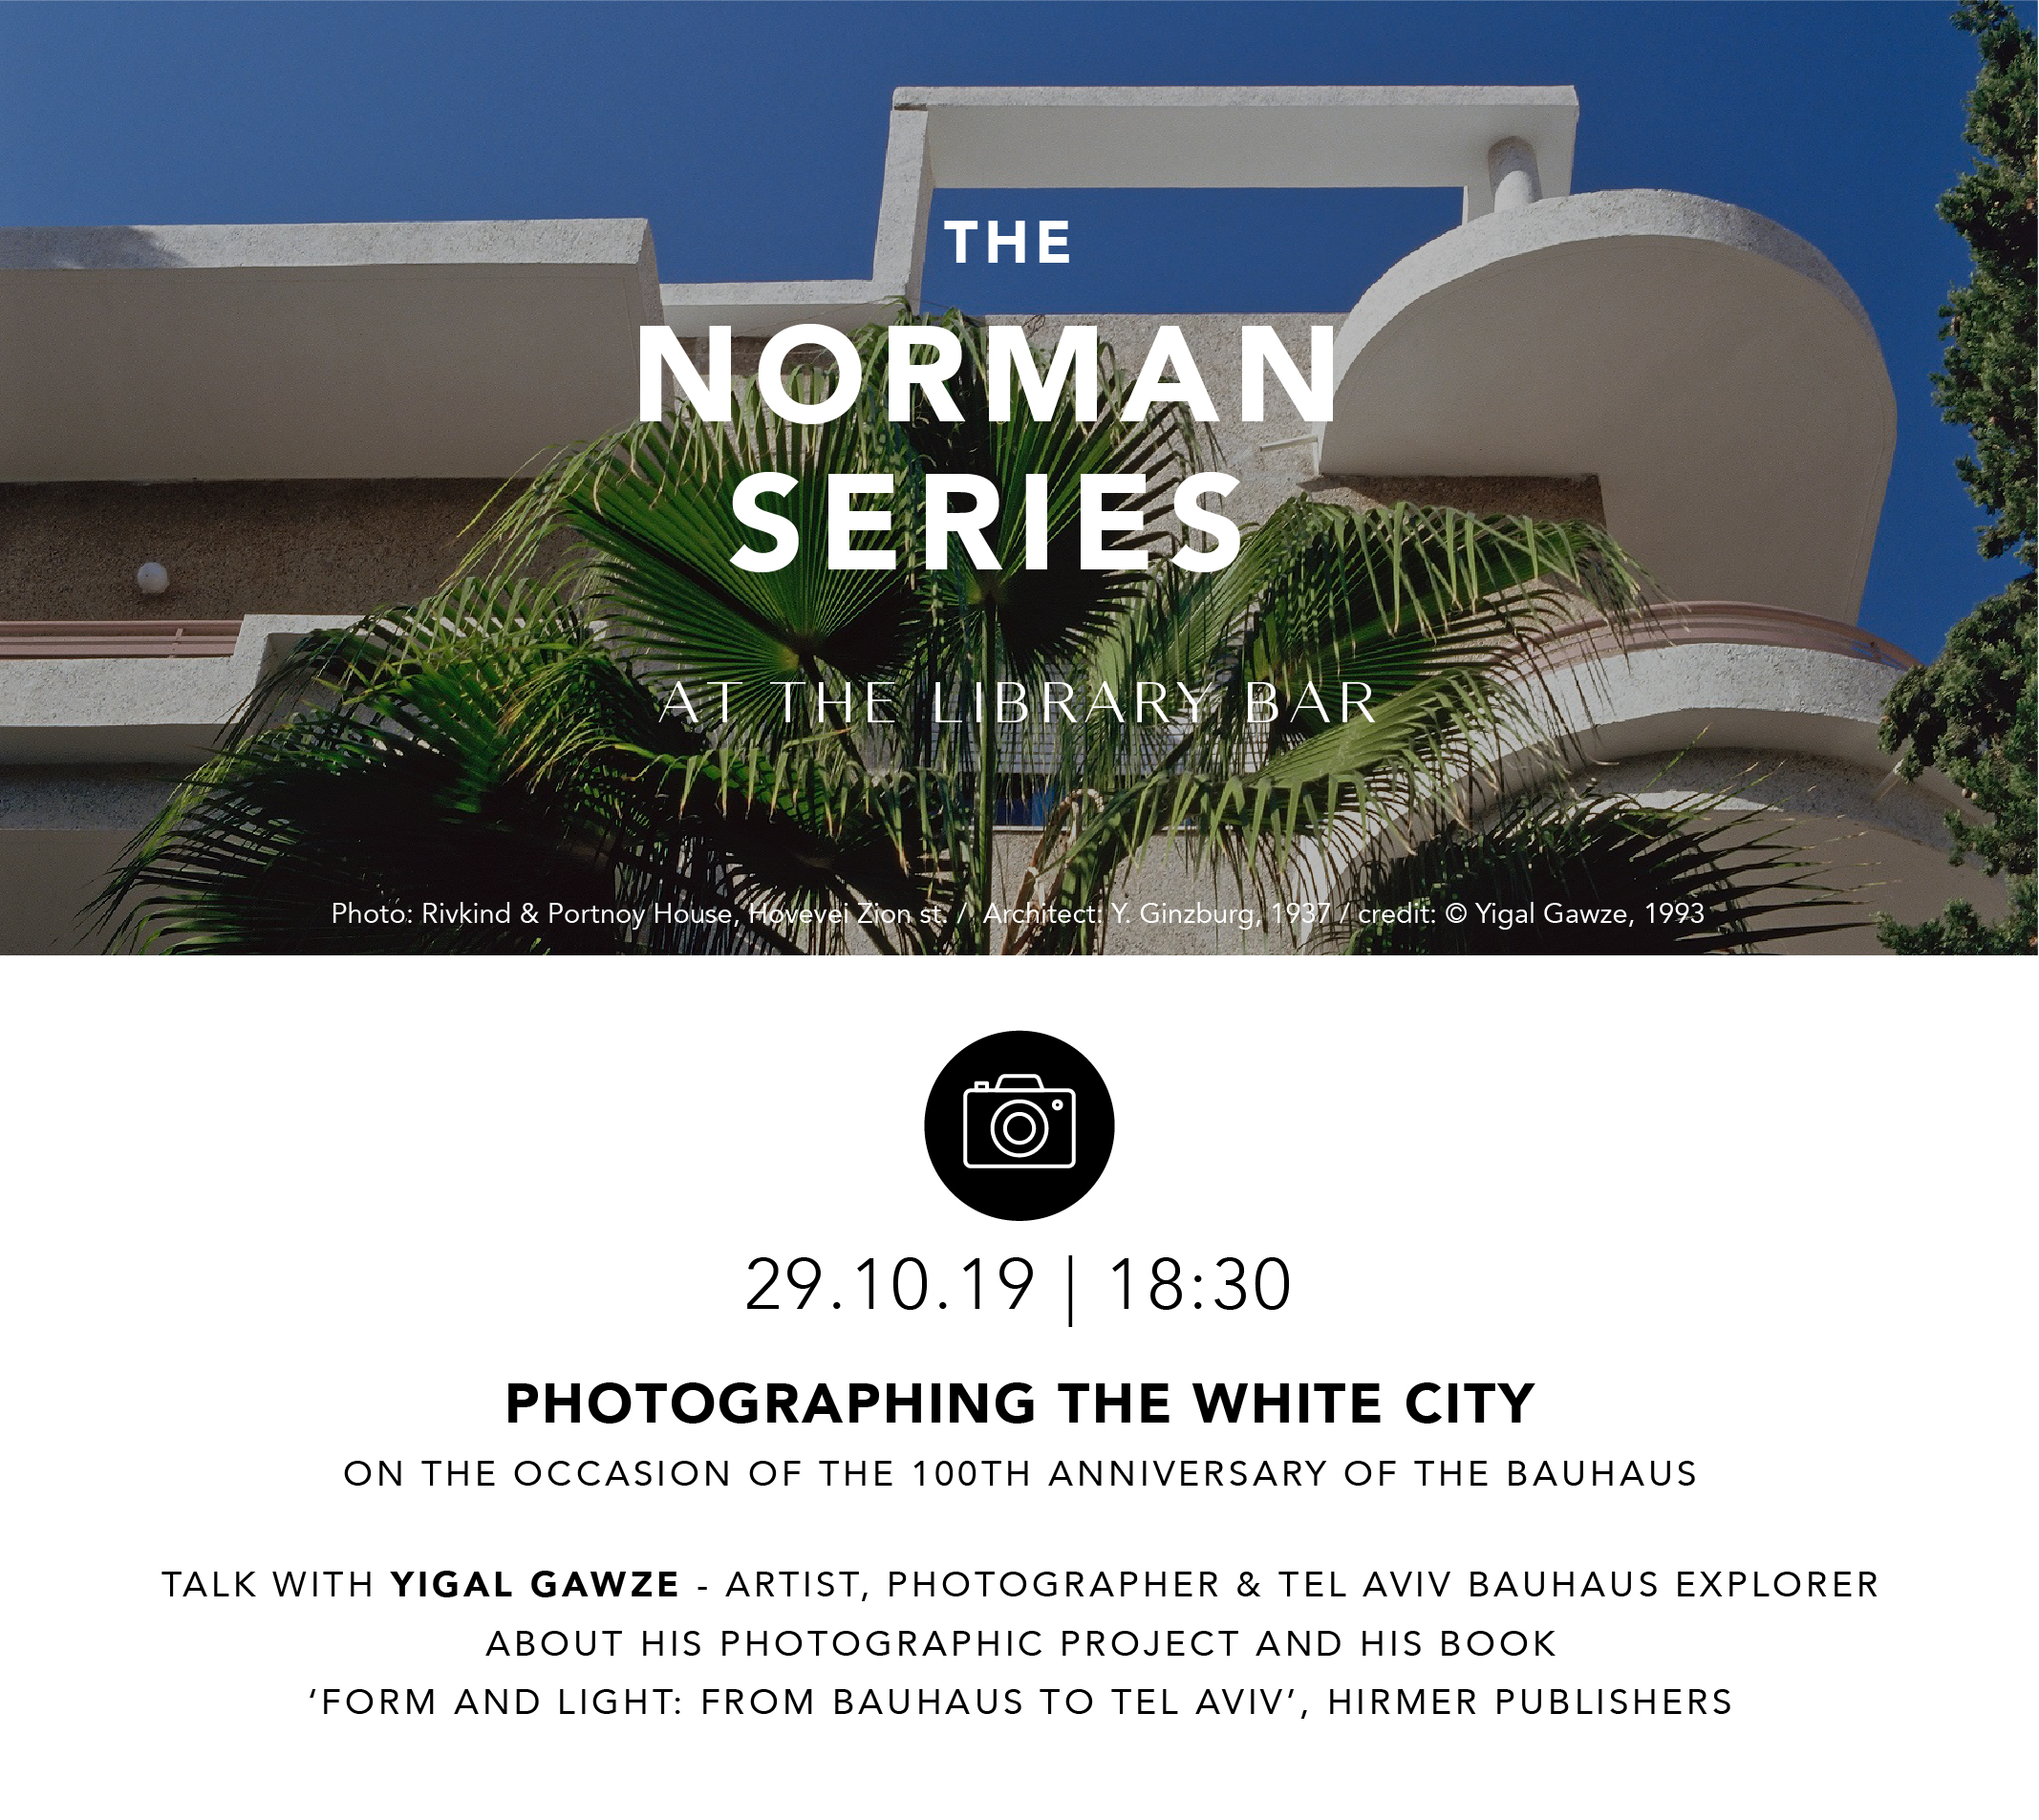 Photographing The White City